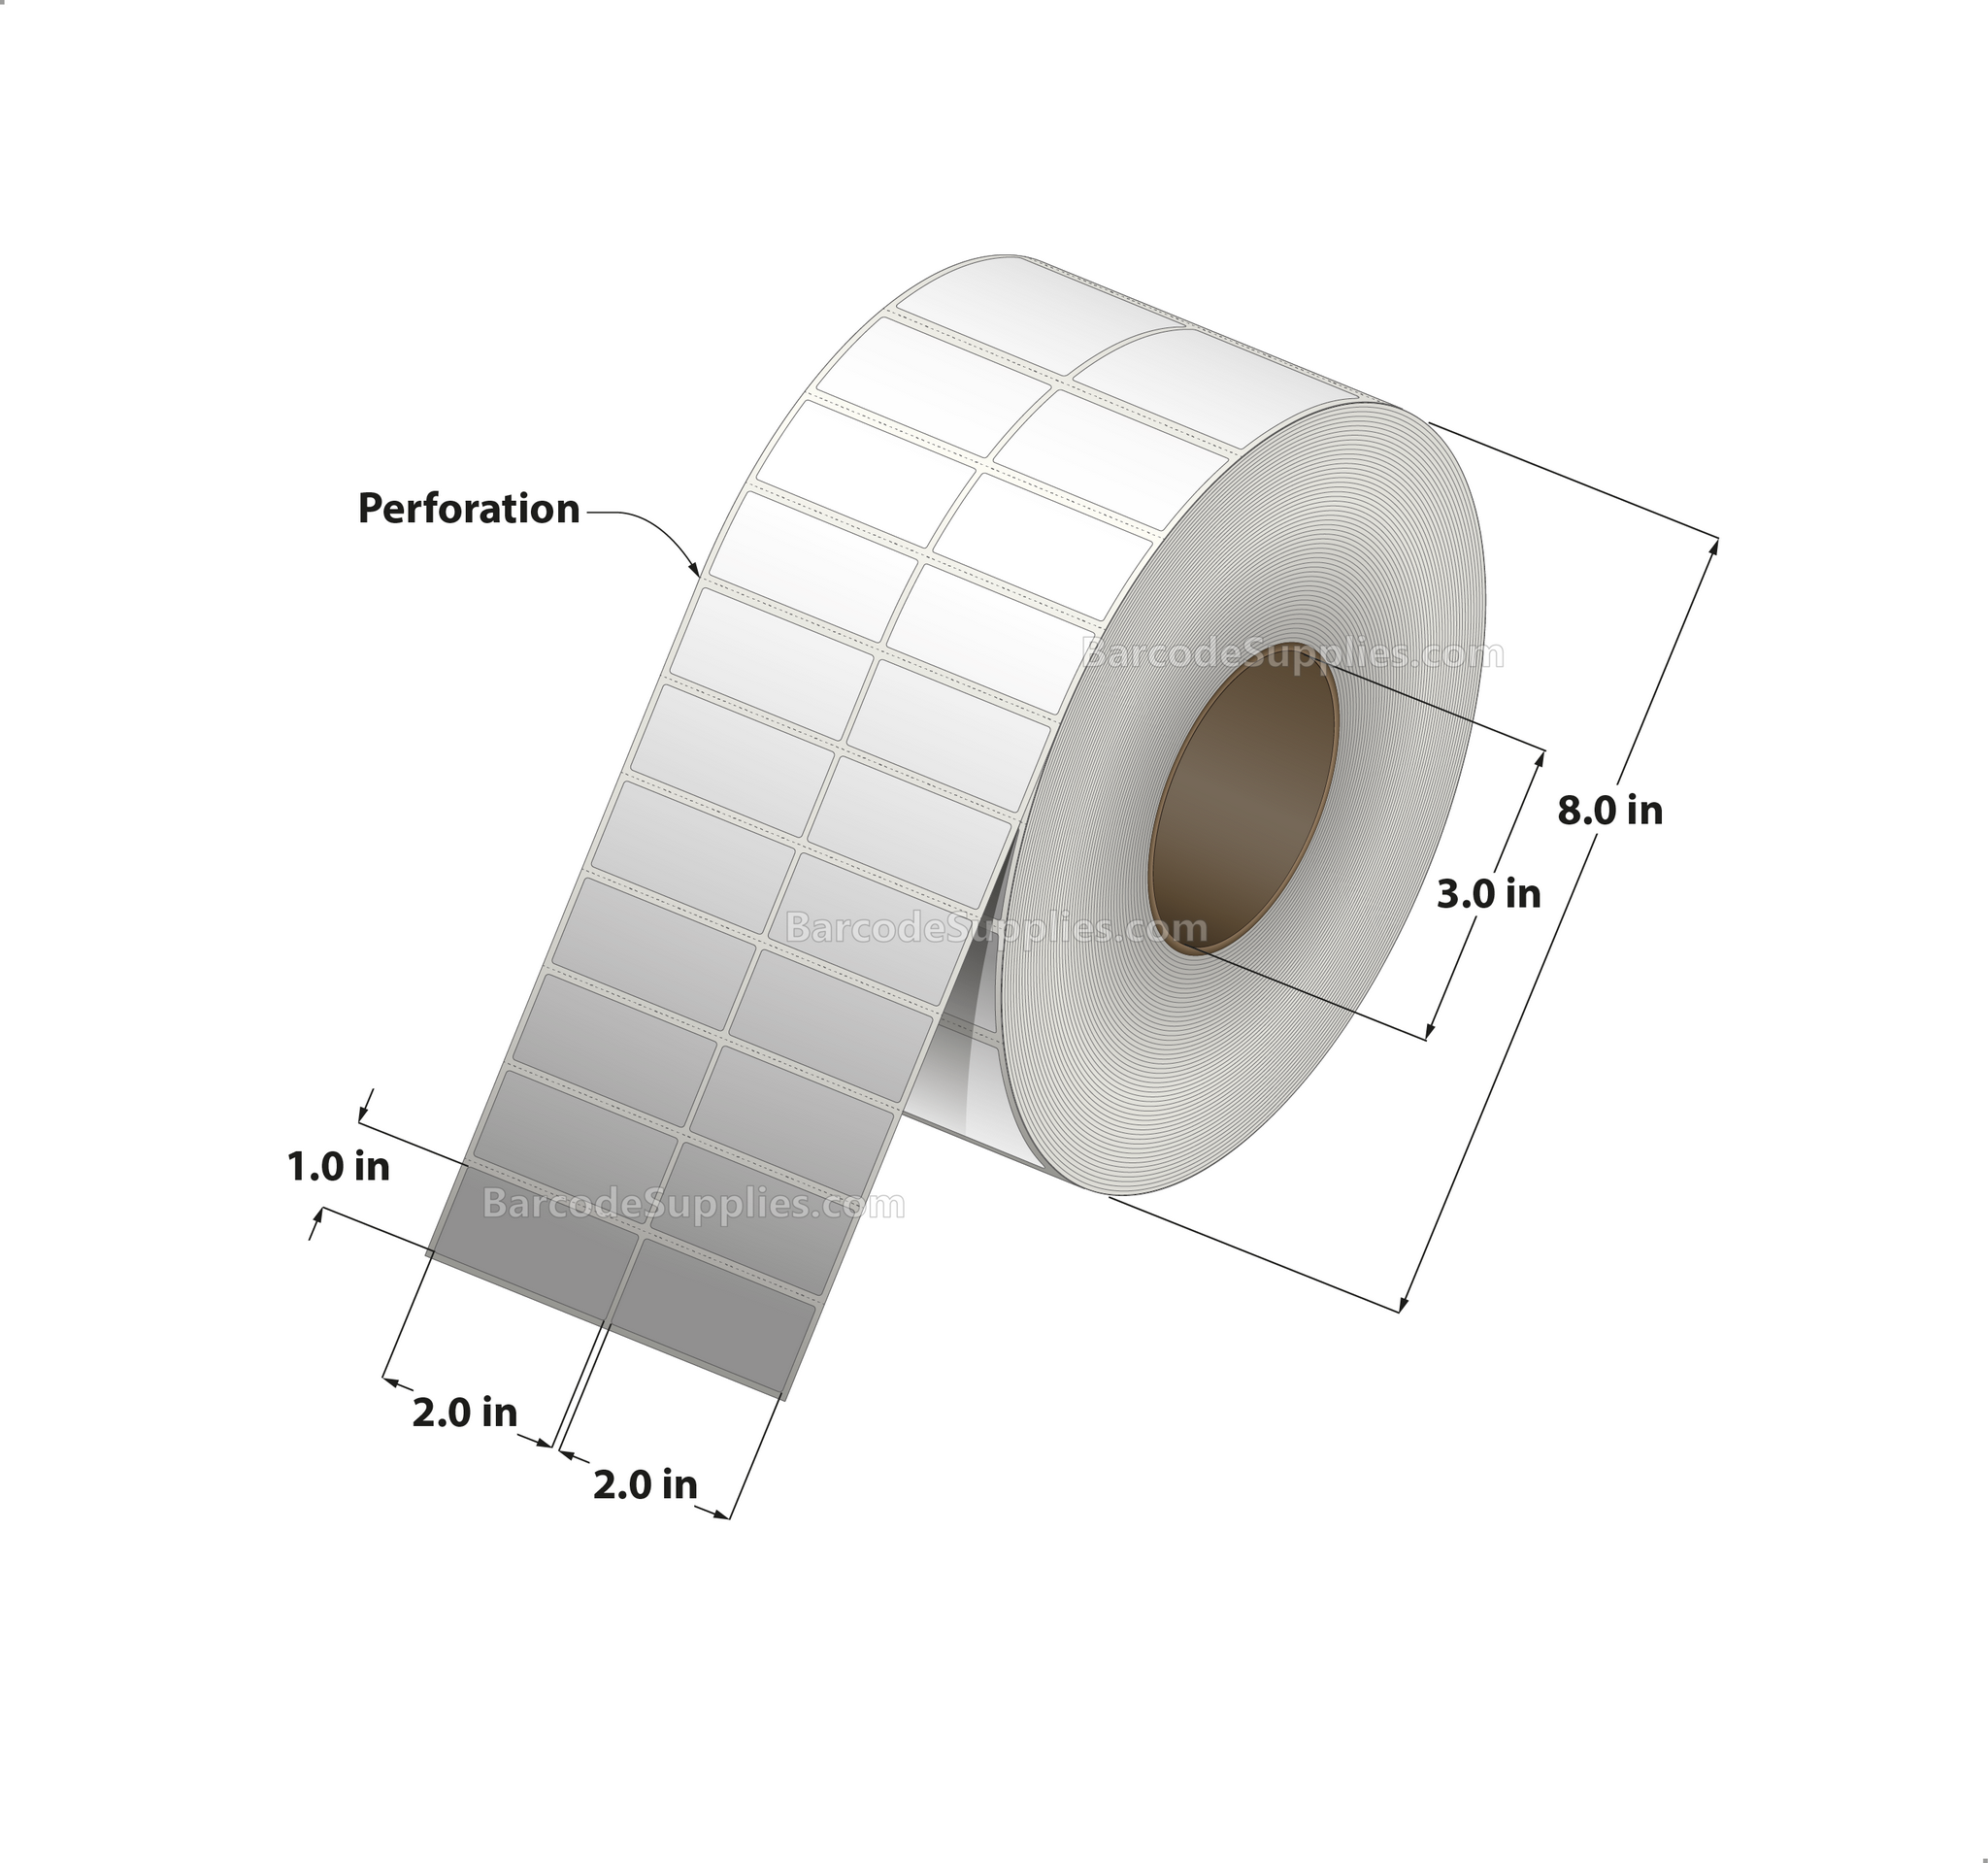 2 x 1 Direct Thermal White Labels With Acrylic Adhesive - Perforated - 11000 Labels Per Roll - Carton Of 4 Rolls - 44000 Labels Total - MPN: RDS-2-1-11000-3 - BarcodeSource, Inc.